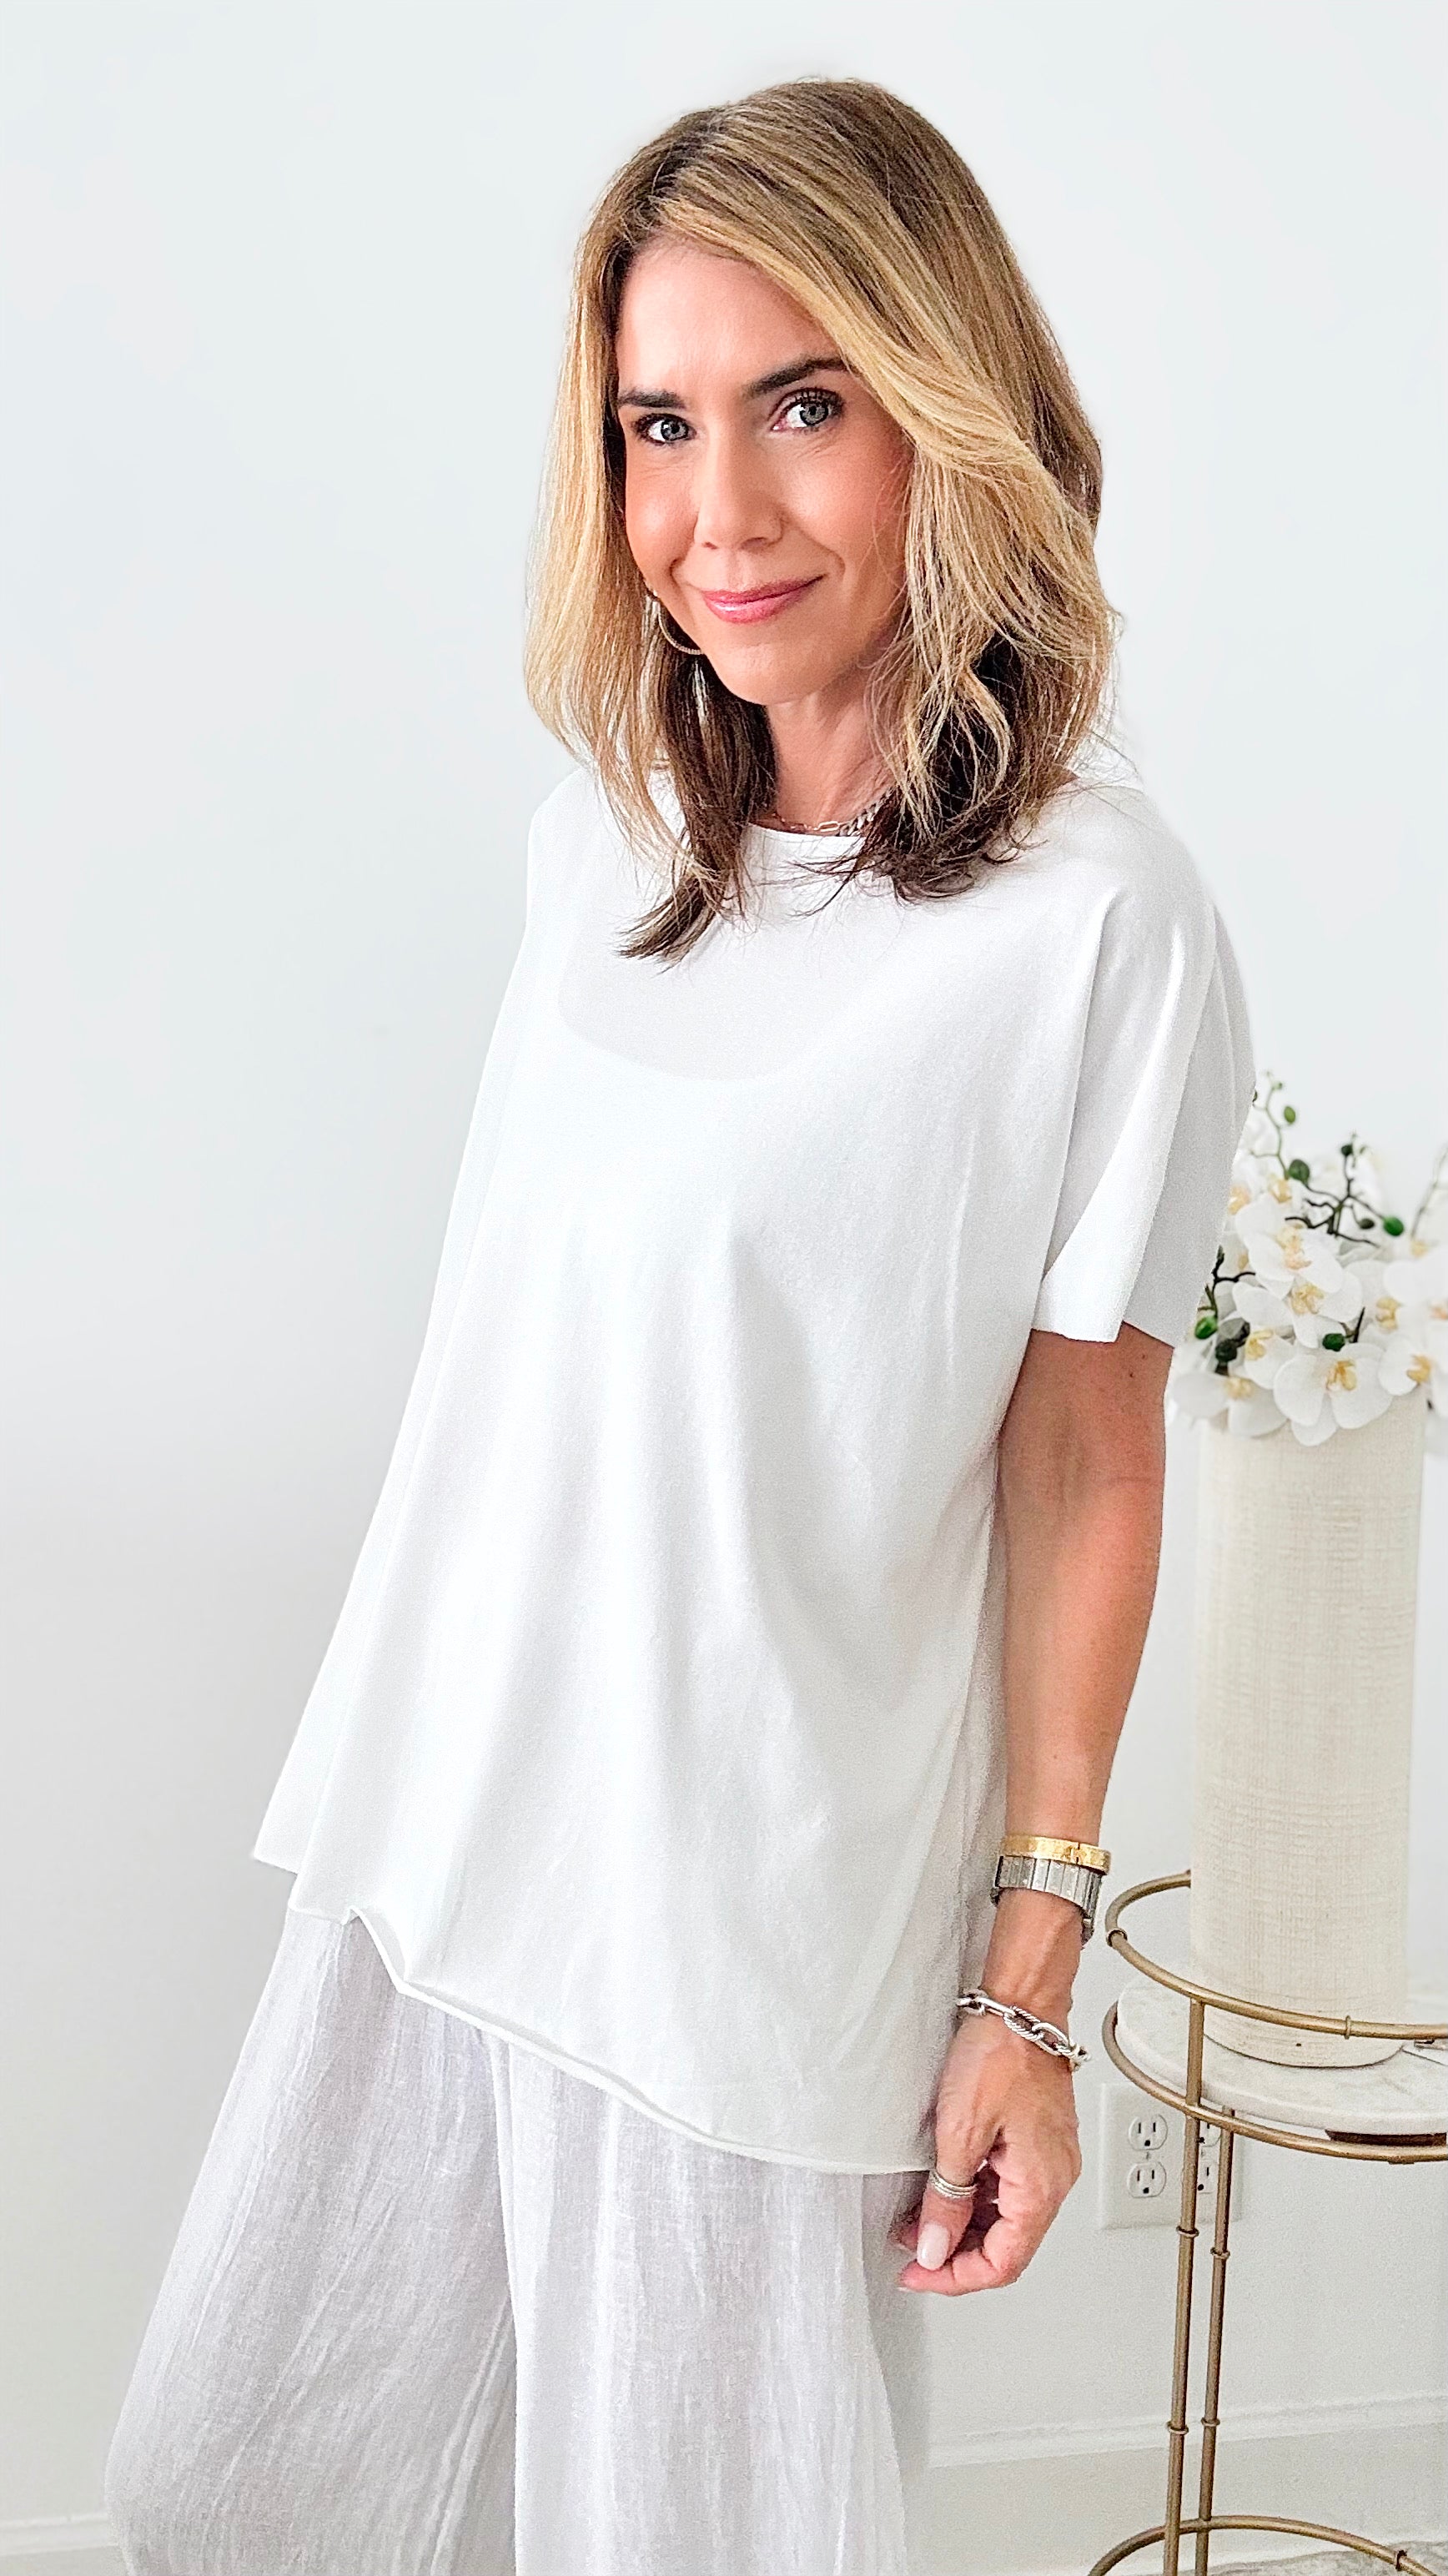 Easy Breezy Italian tee - White-110 Short Sleeve Tops-Italianissimo-Coastal Bloom Boutique, find the trendiest versions of the popular styles and looks Located in Indialantic, FL